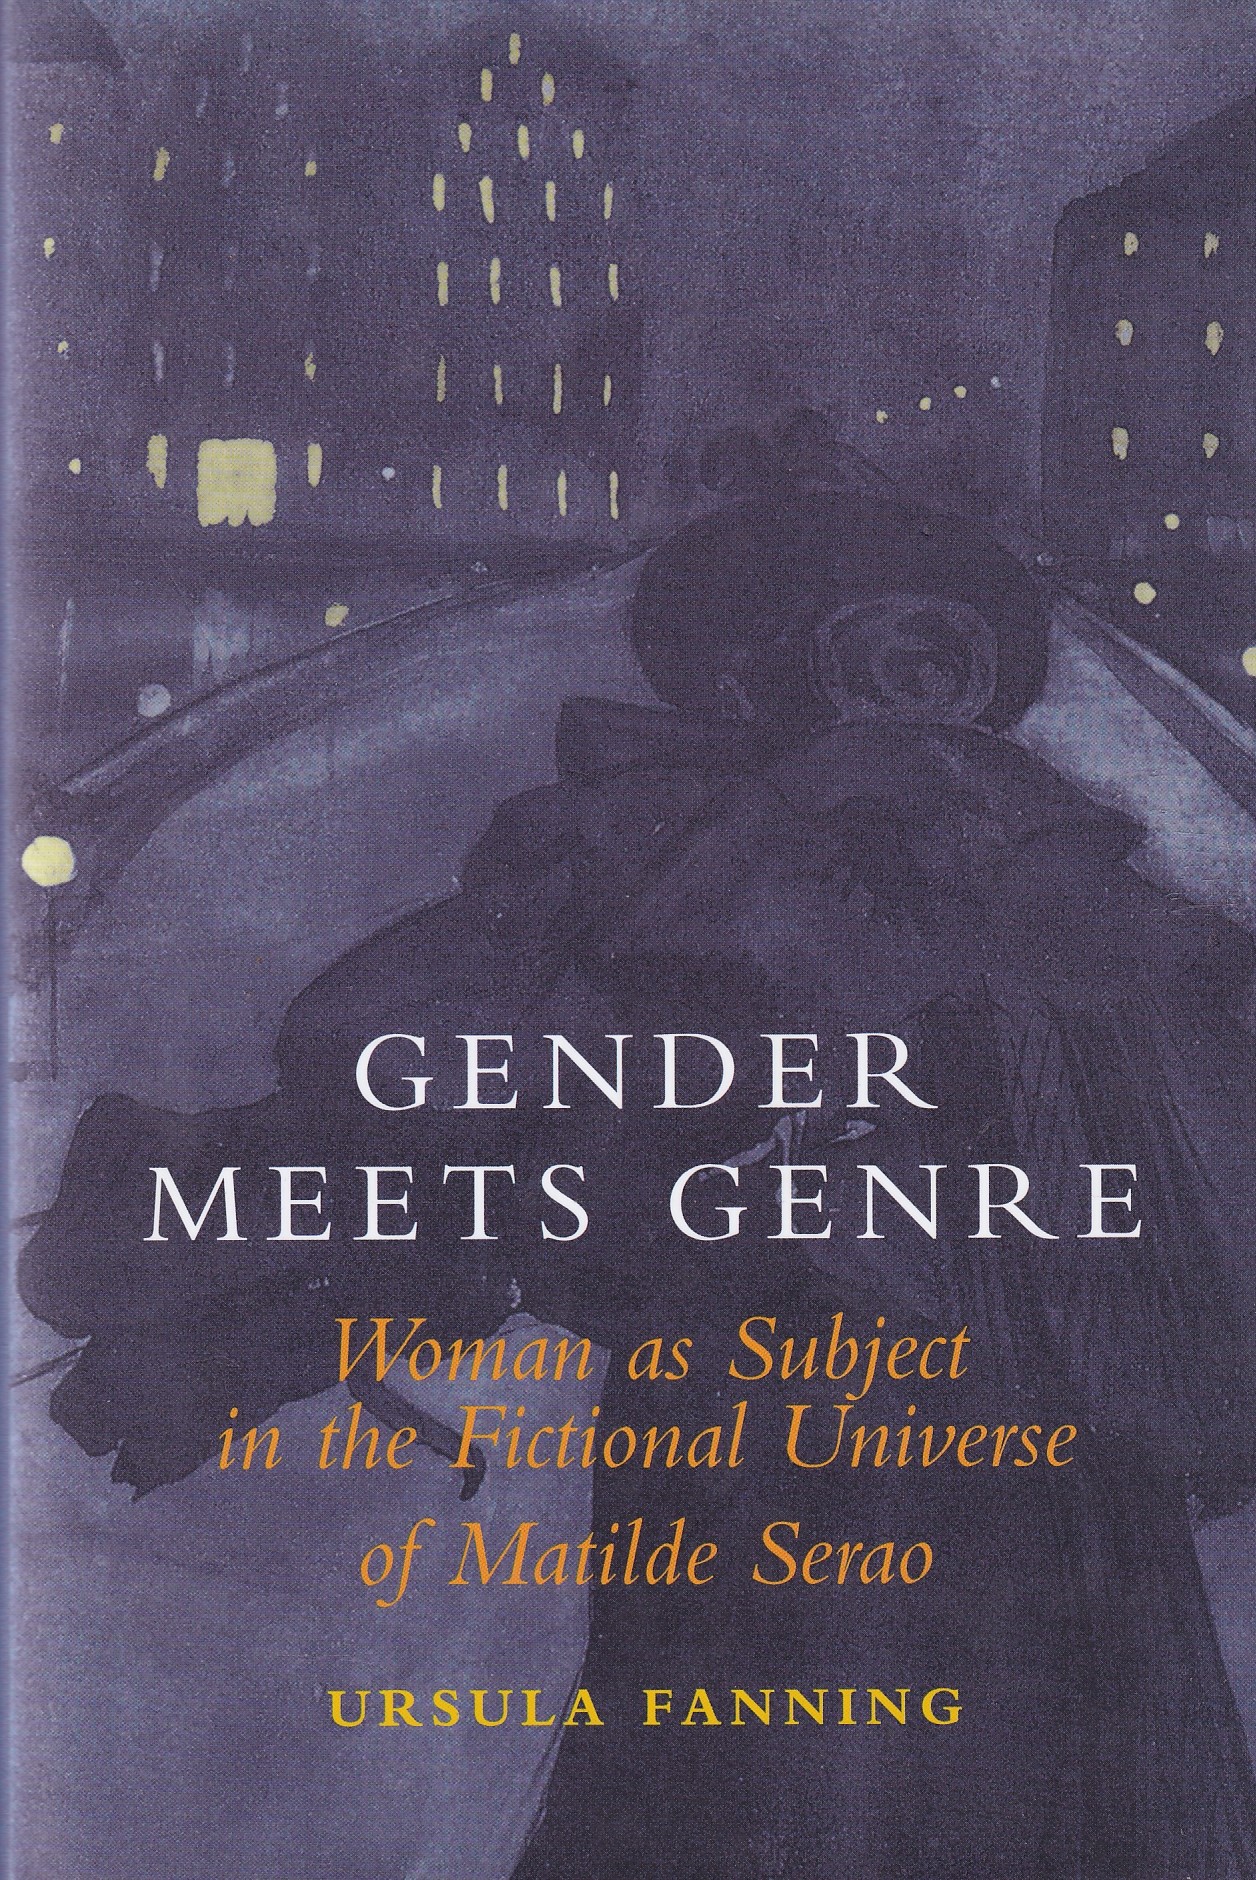 Gender Meets Genre: Woman As Subject in the Fictional Universe of Matilde Serao by Ursula Fanning